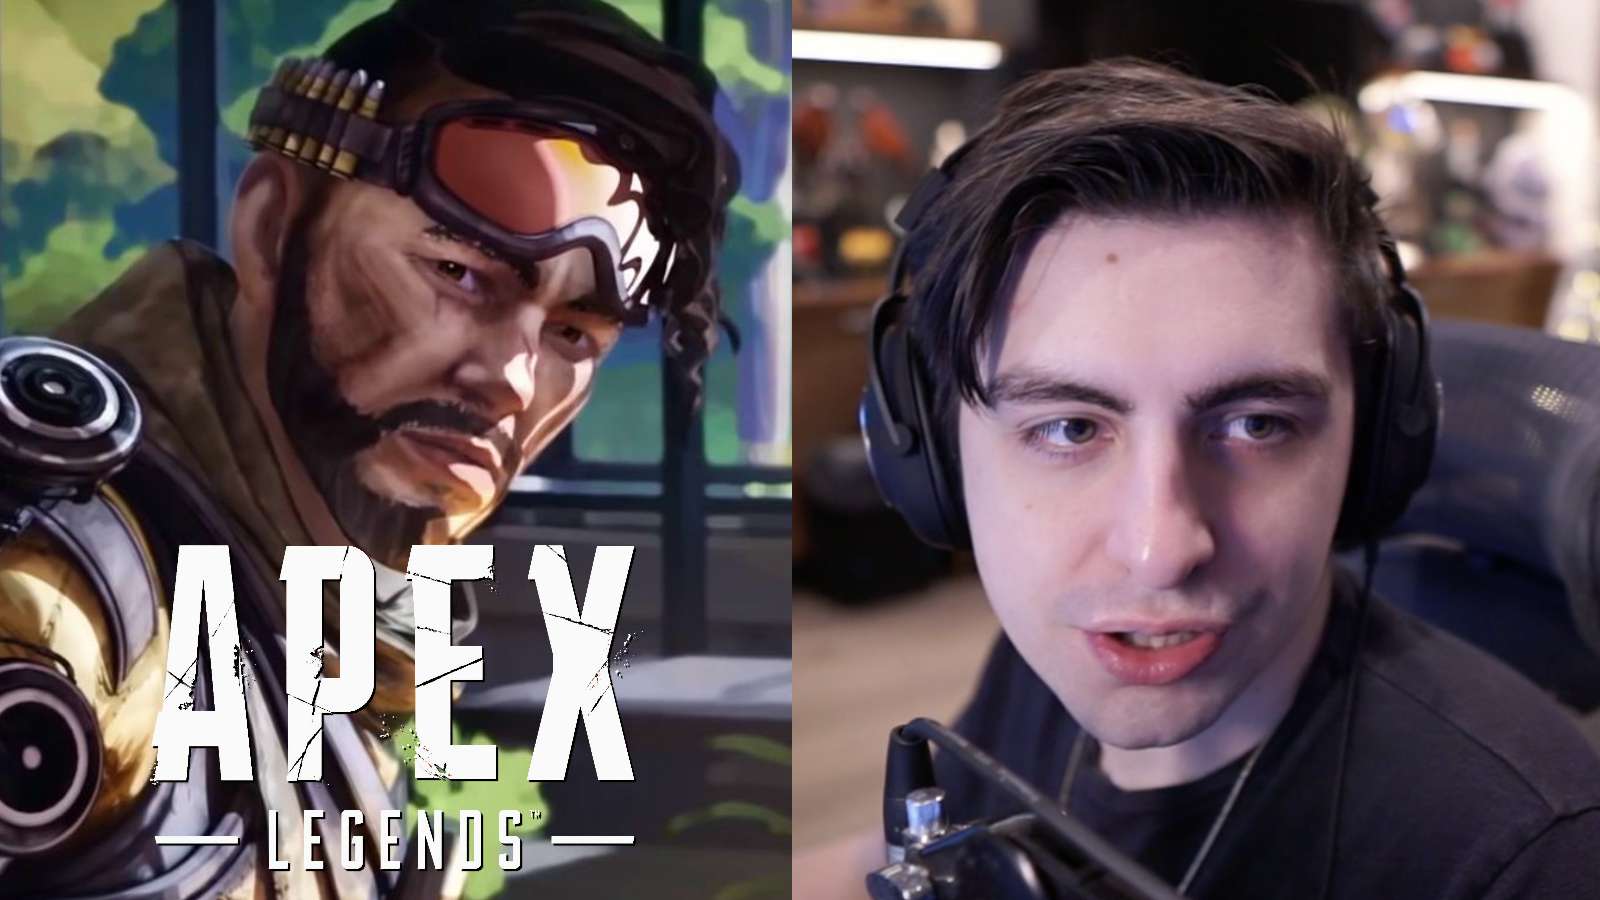 Apex Legends Mirage on left with Apex Legends logo shroud on right talking to viewers